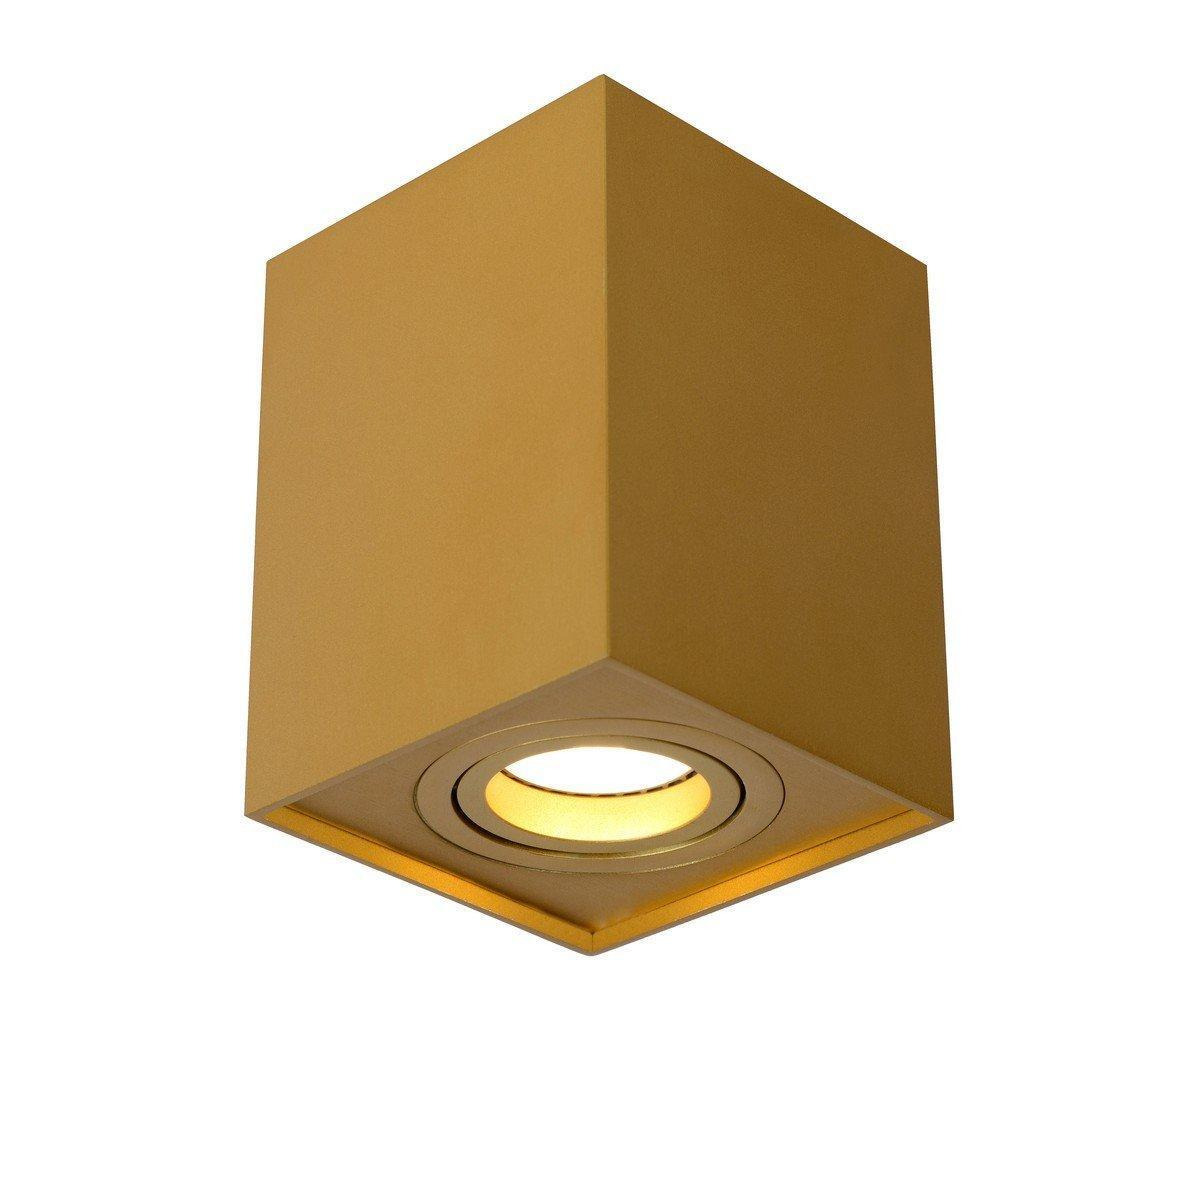 'TUBE' Dimmable Tiltable Surface Mounted Ceiling Spotlight 1xGU10 - image 1